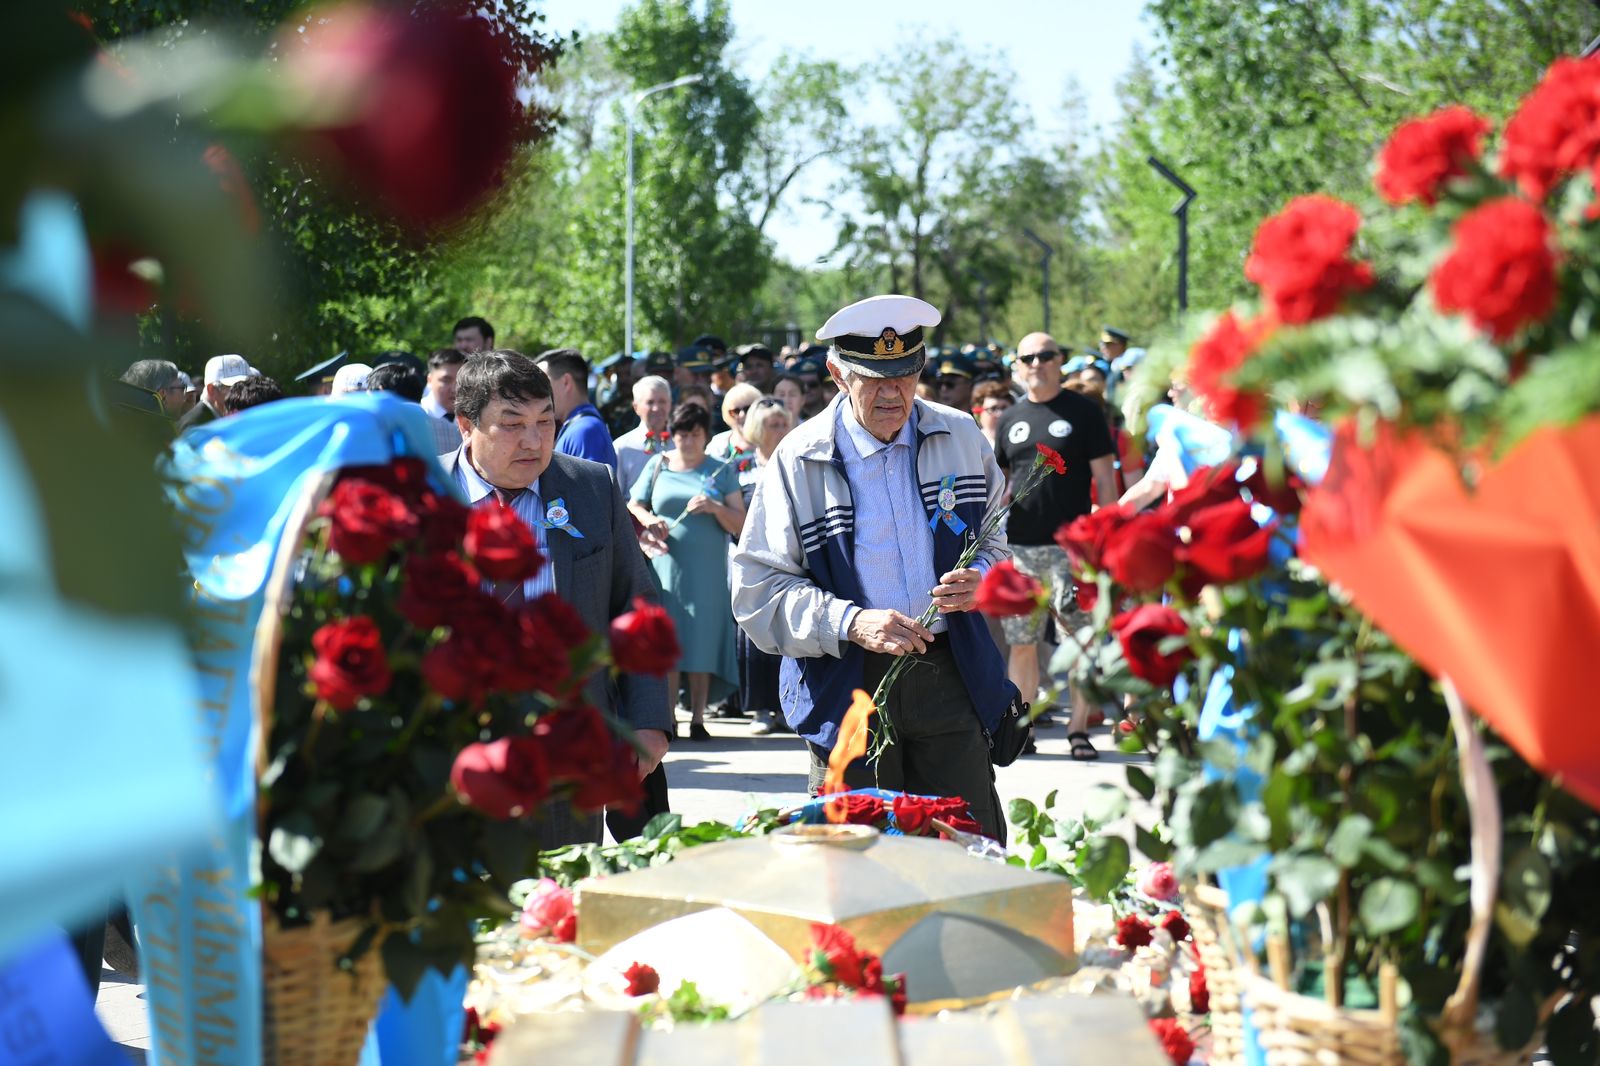 Akim of Almaty region congratulated veterans of the Great Patriotic War on Victory Day